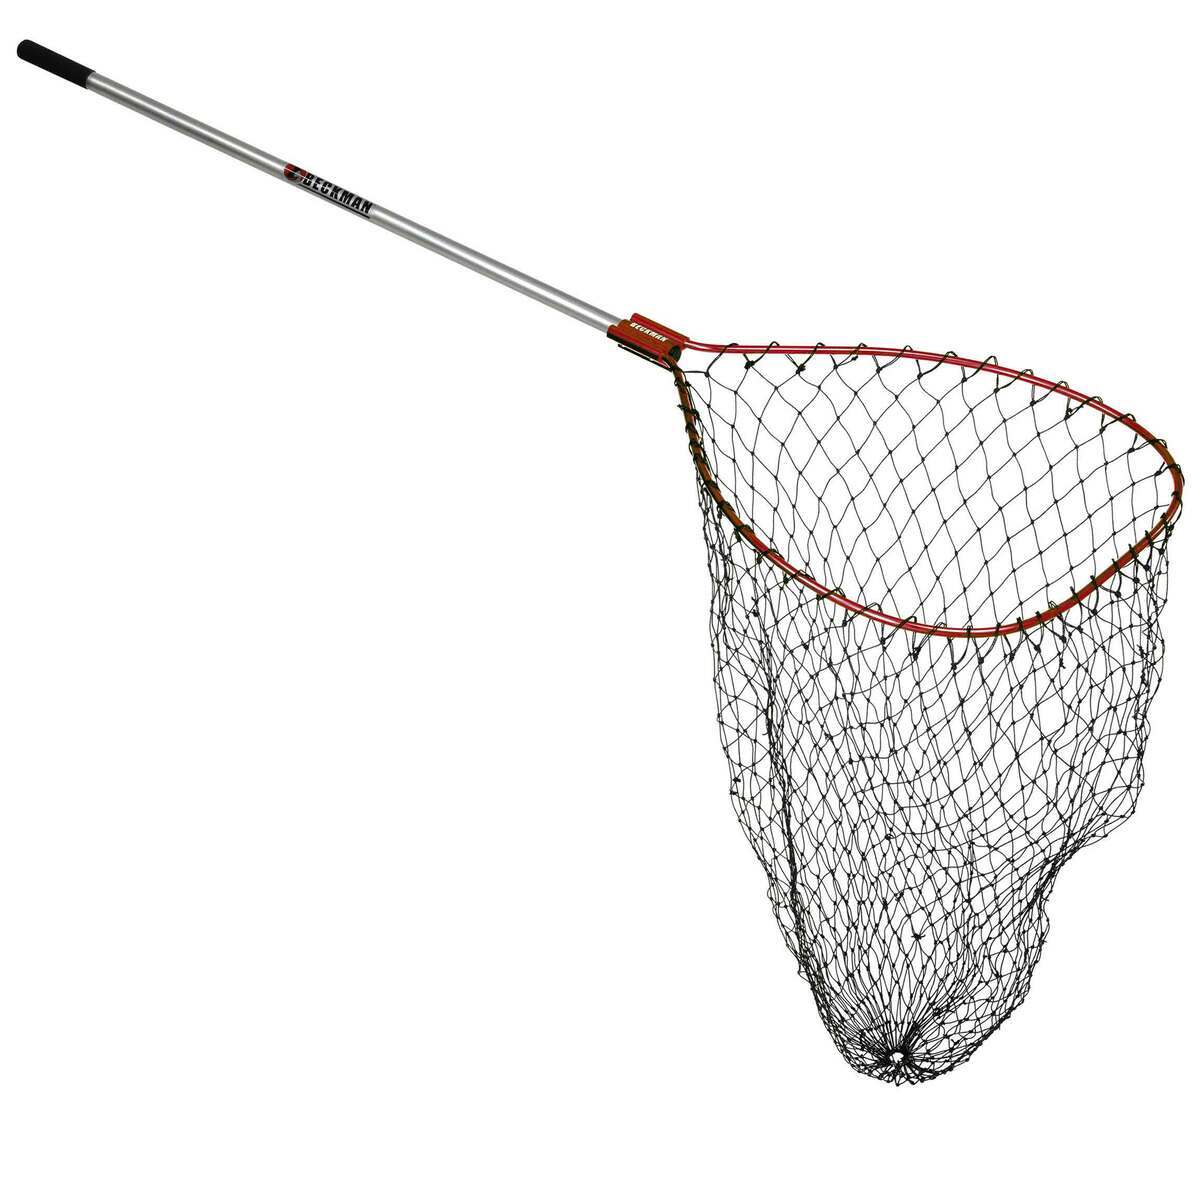 Beckman Fixed Handle/Coated Nylon Landing Net - Red/Silver, 26in W x 34in L